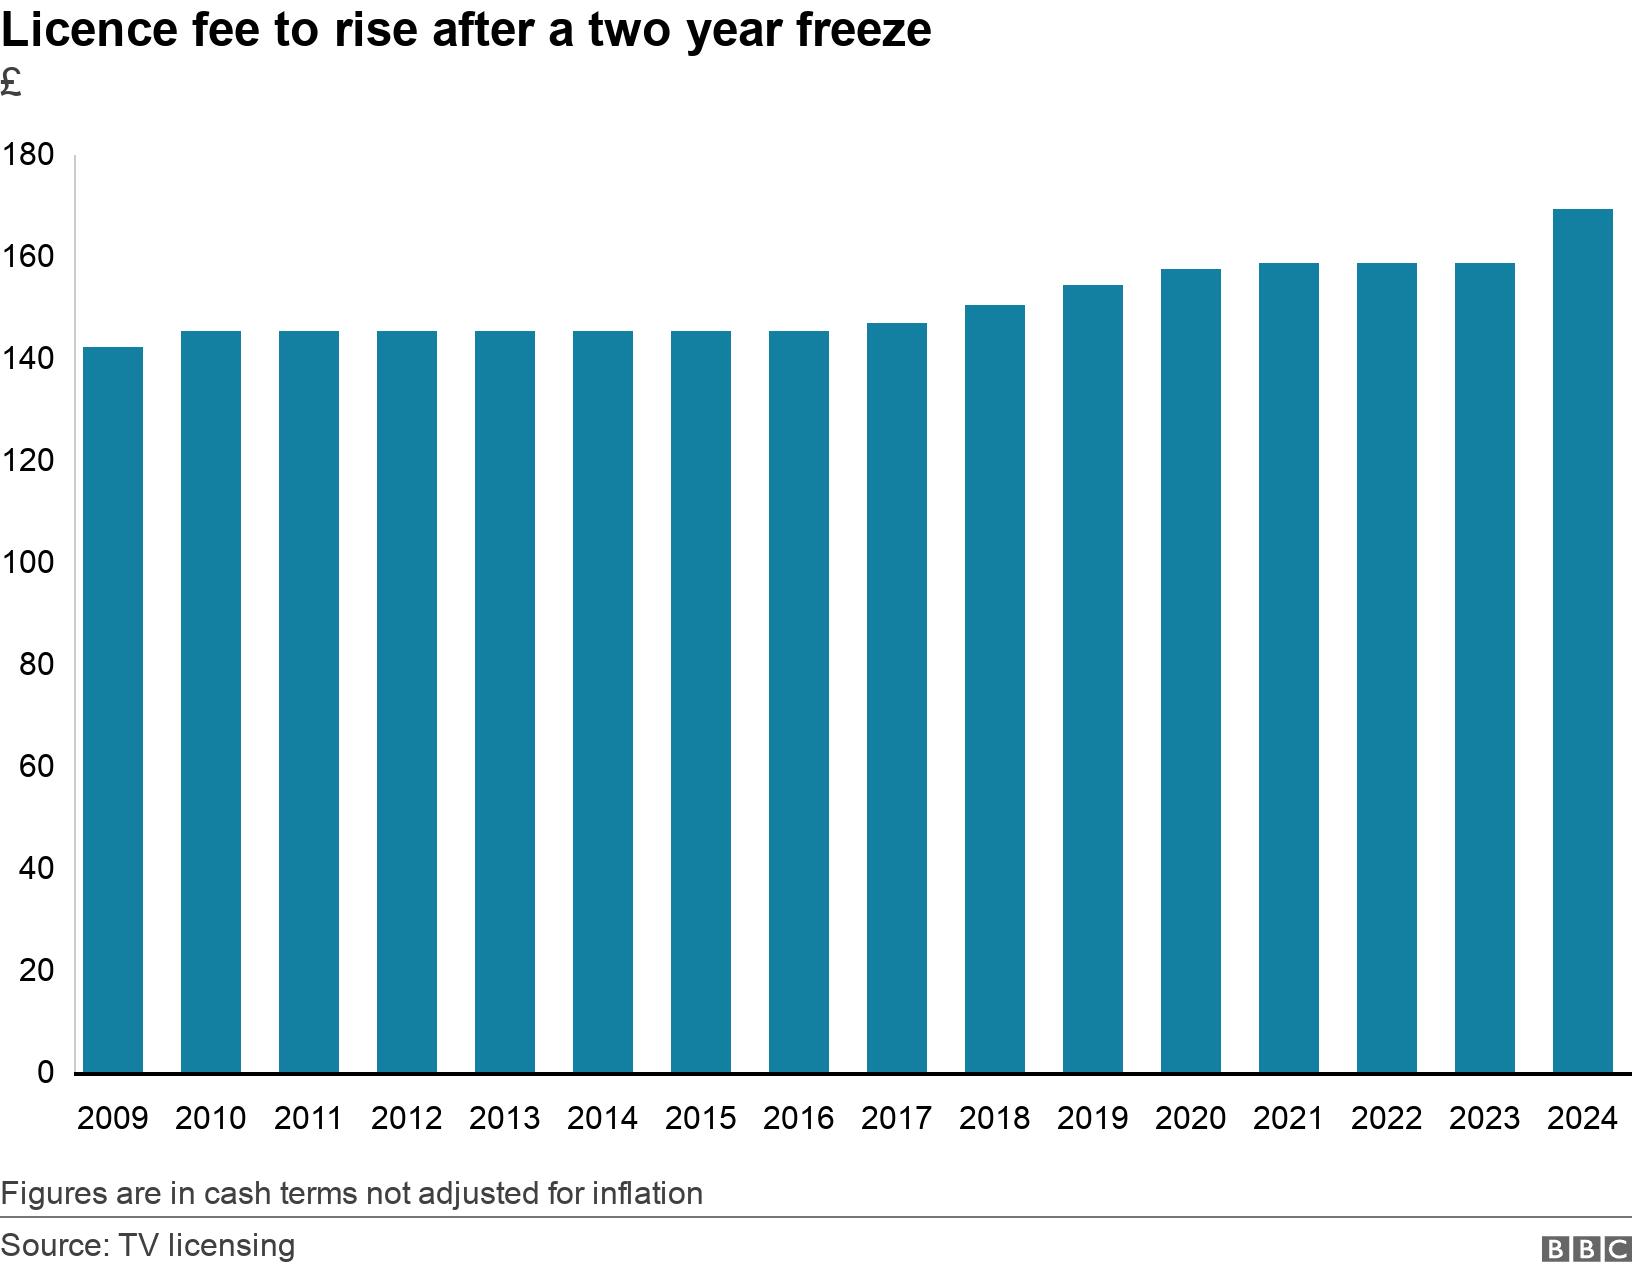 Licence fee to rise after a two year freeze. £.  Figures are in cash terms not adjusted for inflation.